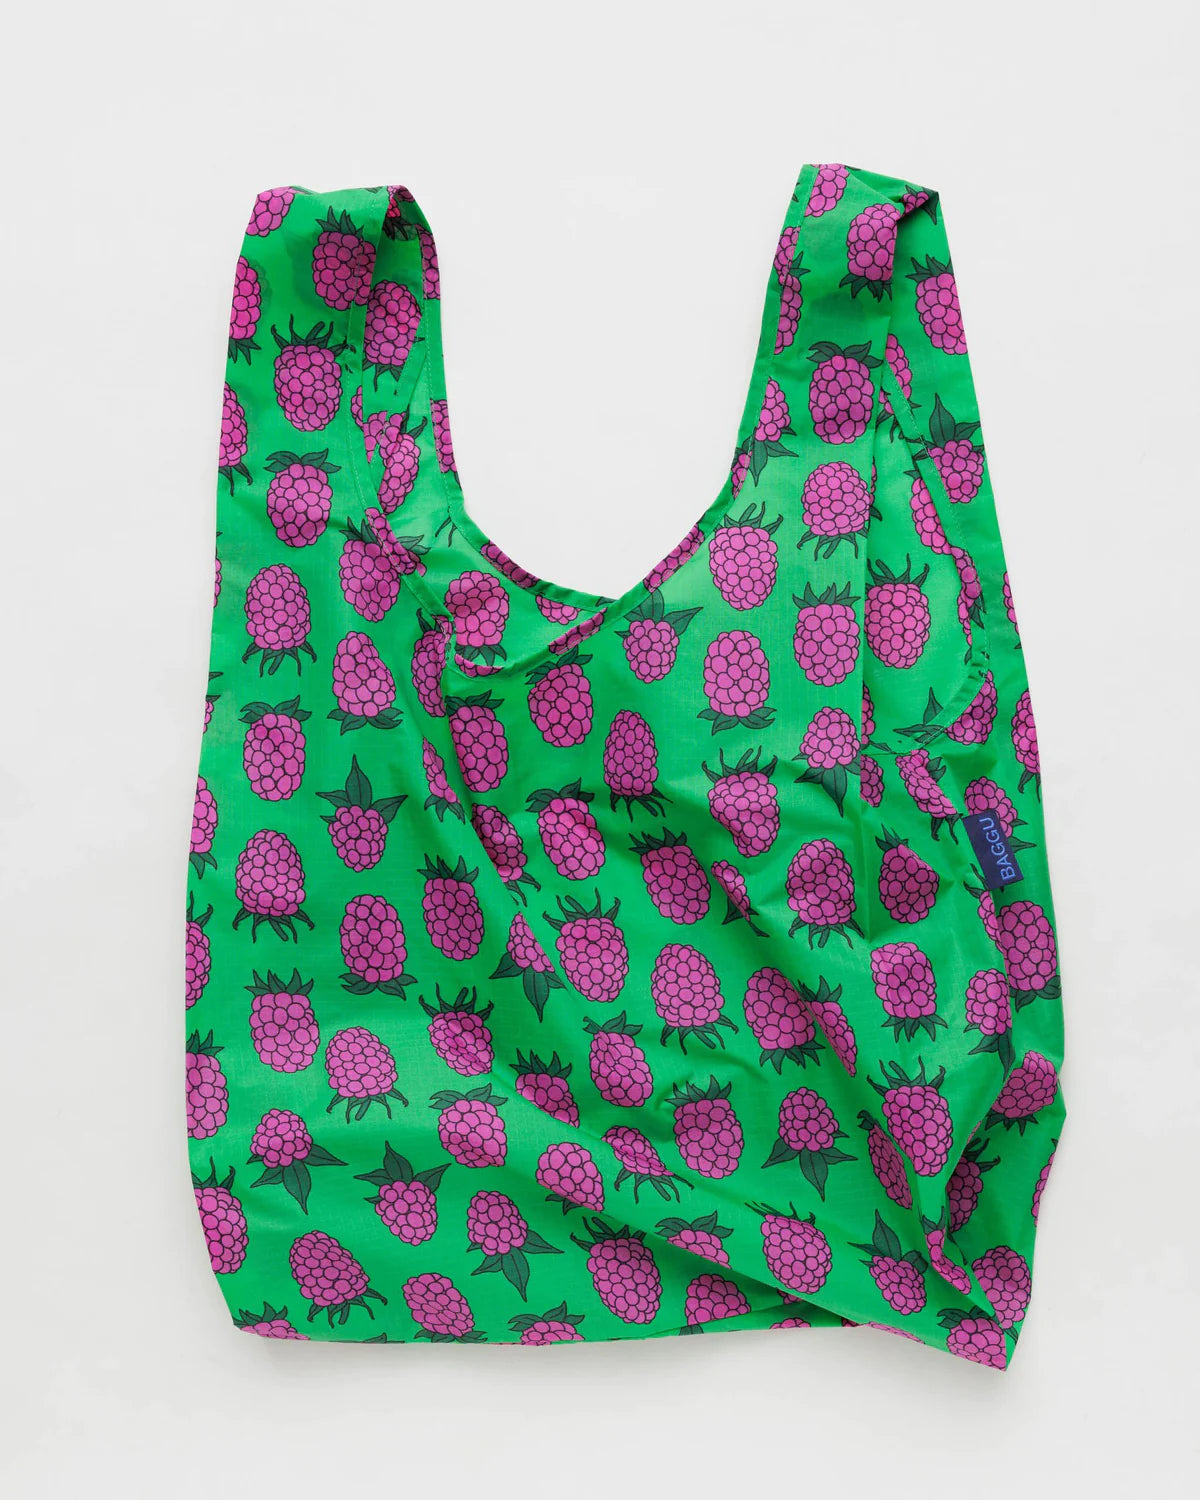 Inside Baggu, the Hypercolorful, Reusable Tote for Every